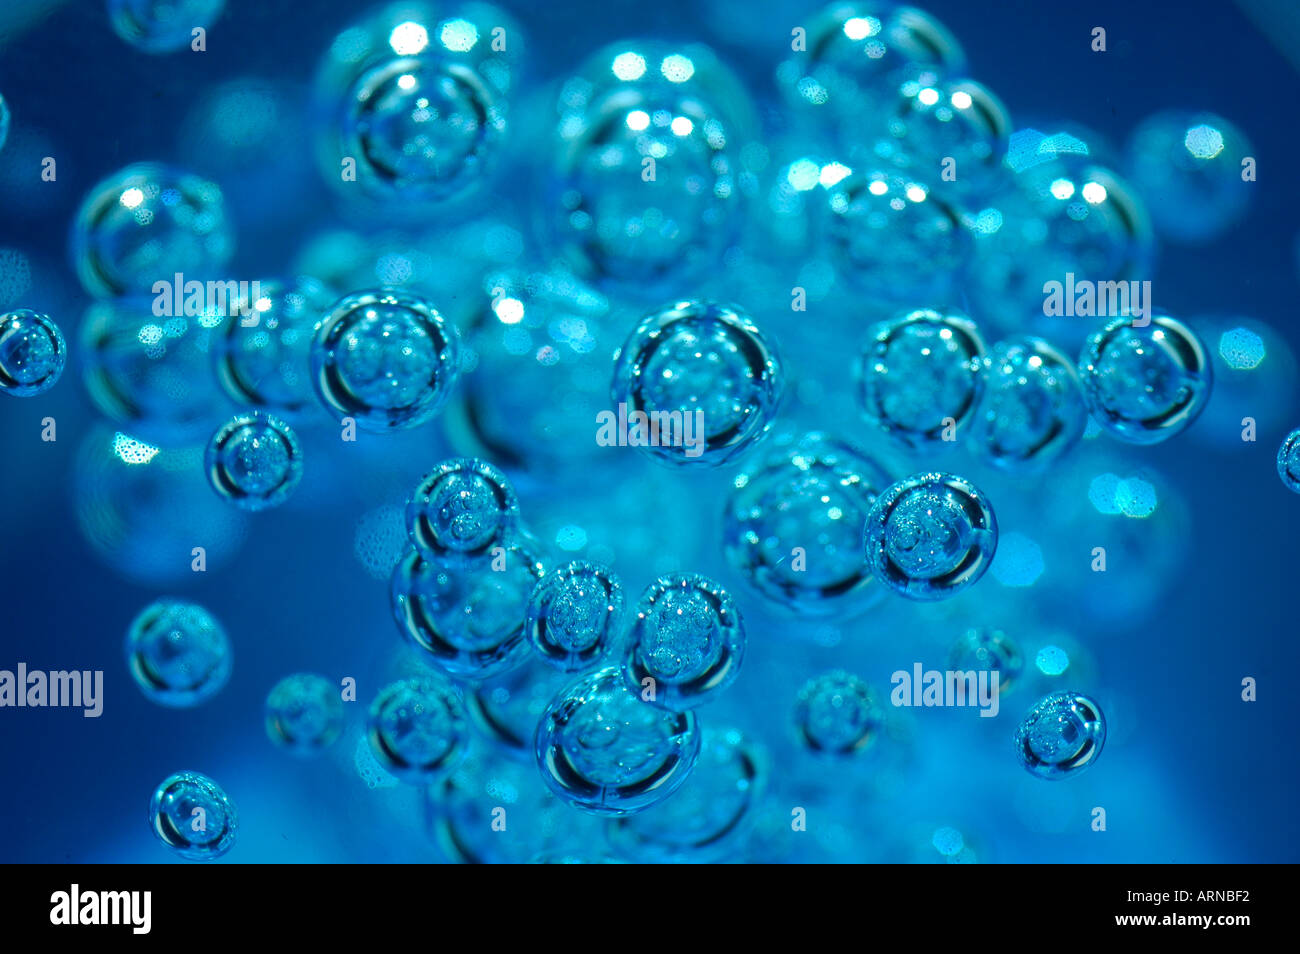 Bubbles in Pantone Classic Blue background Stock Photo